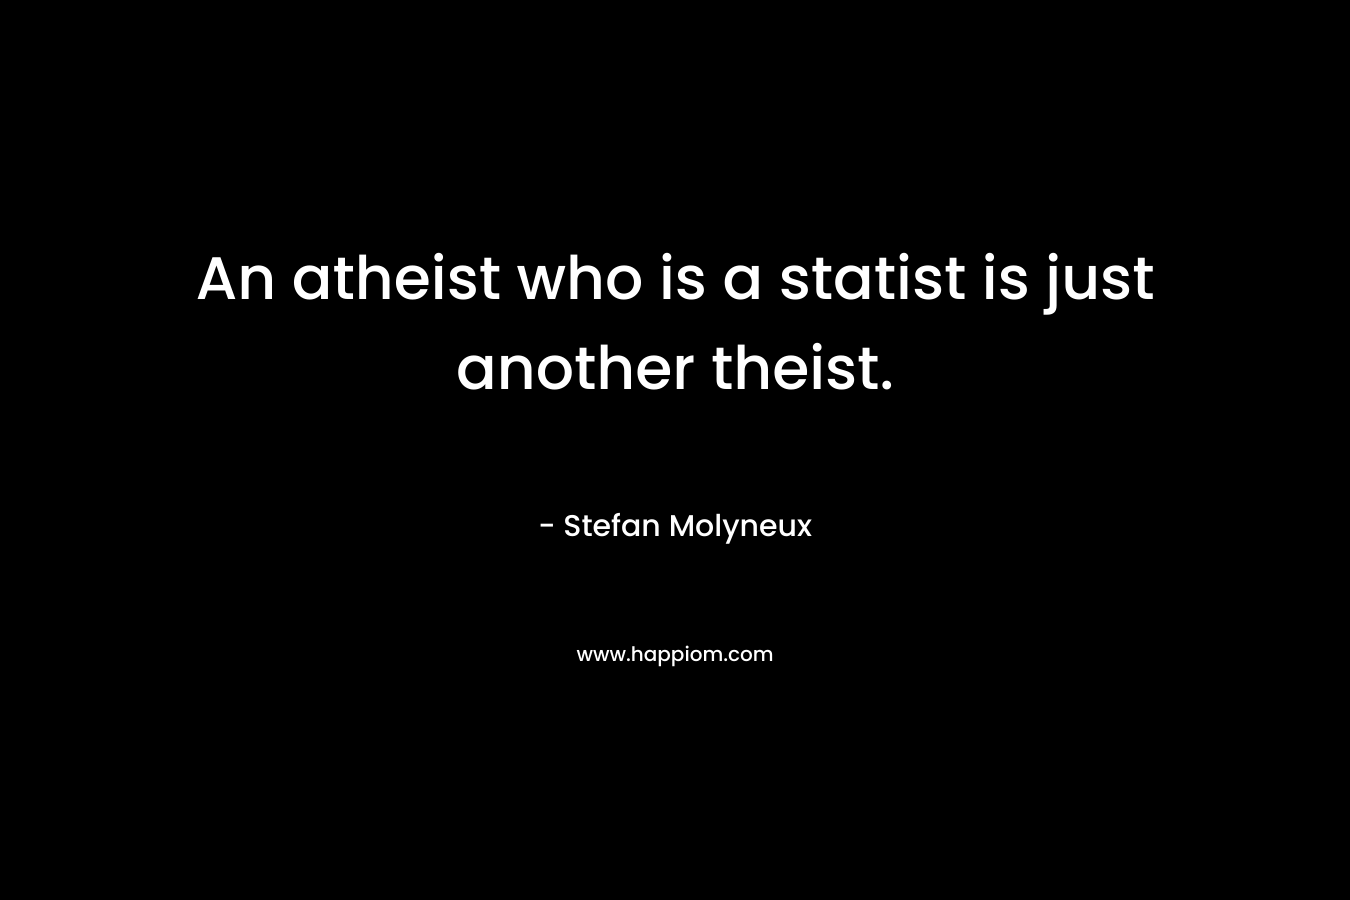 An atheist who is a statist is just another theist. – Stefan Molyneux